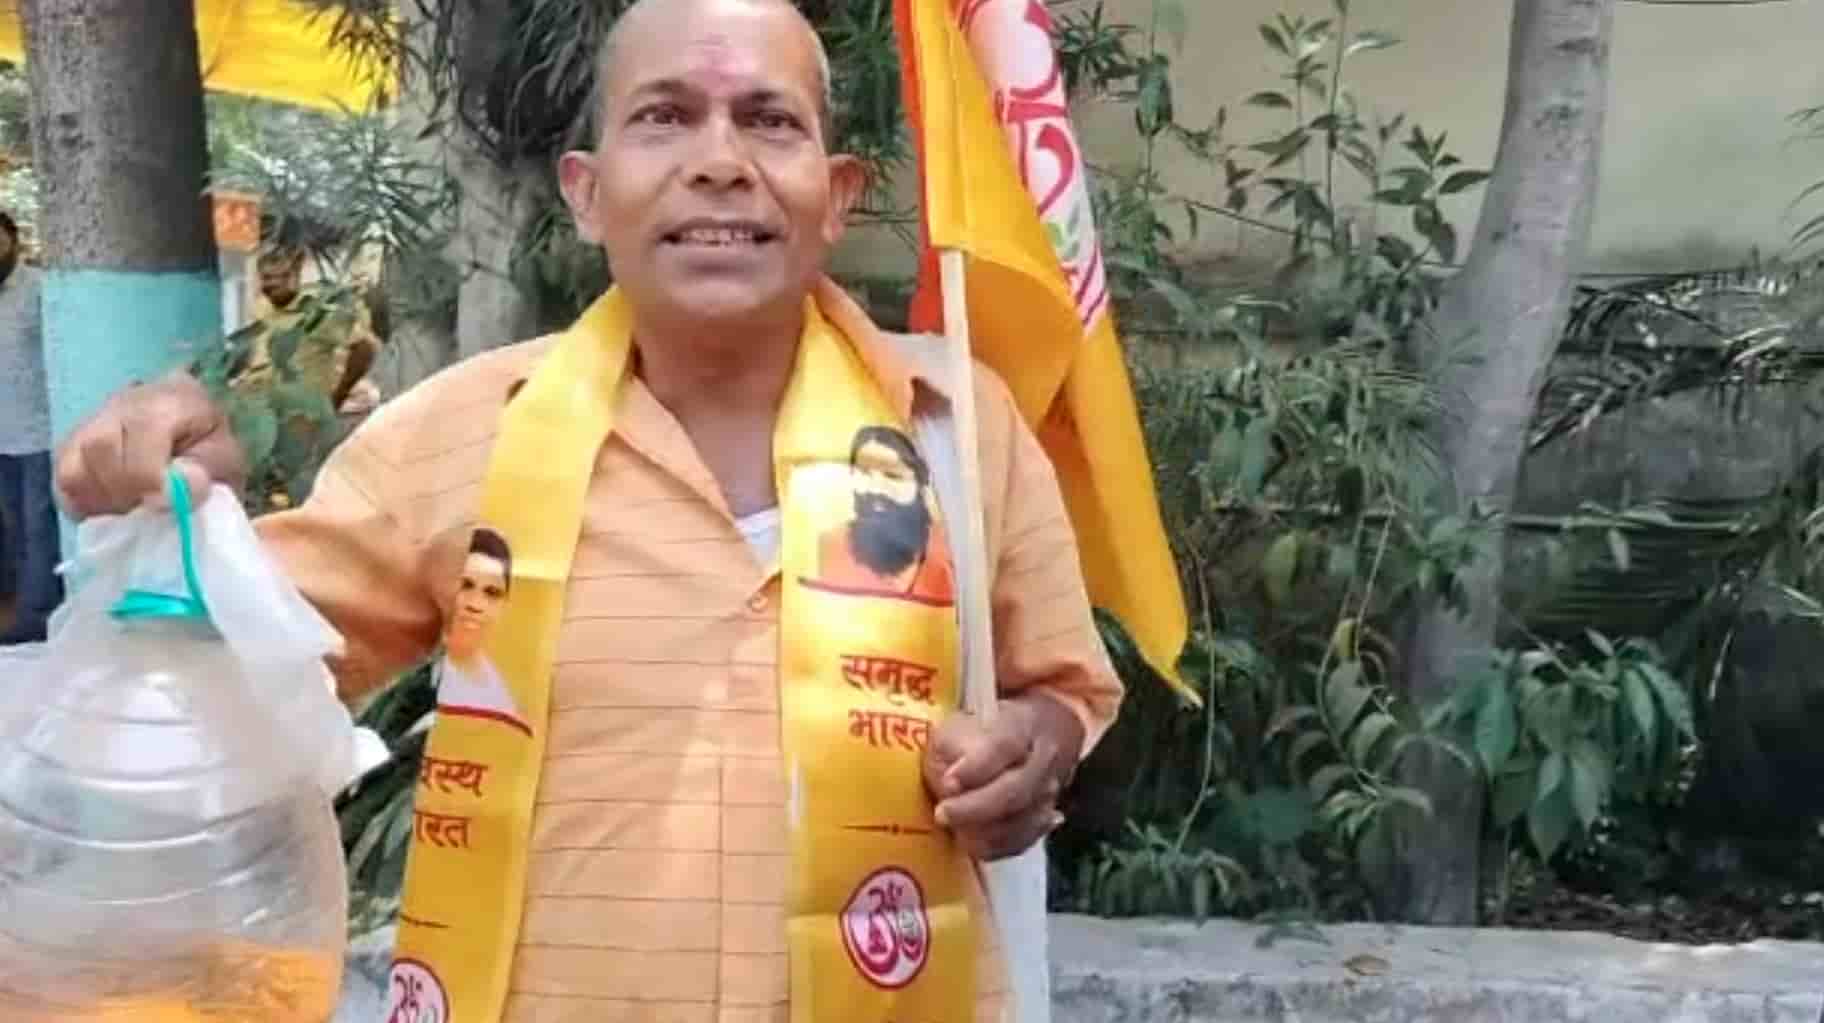 self immolation attempt Jharkhand Town Post's persistent anti-corruption activist Ajit Kumar Sao, frustrated by a decade of inaction, attempted self-immolation only to be arrested at the Jamshedpur district headquarters.